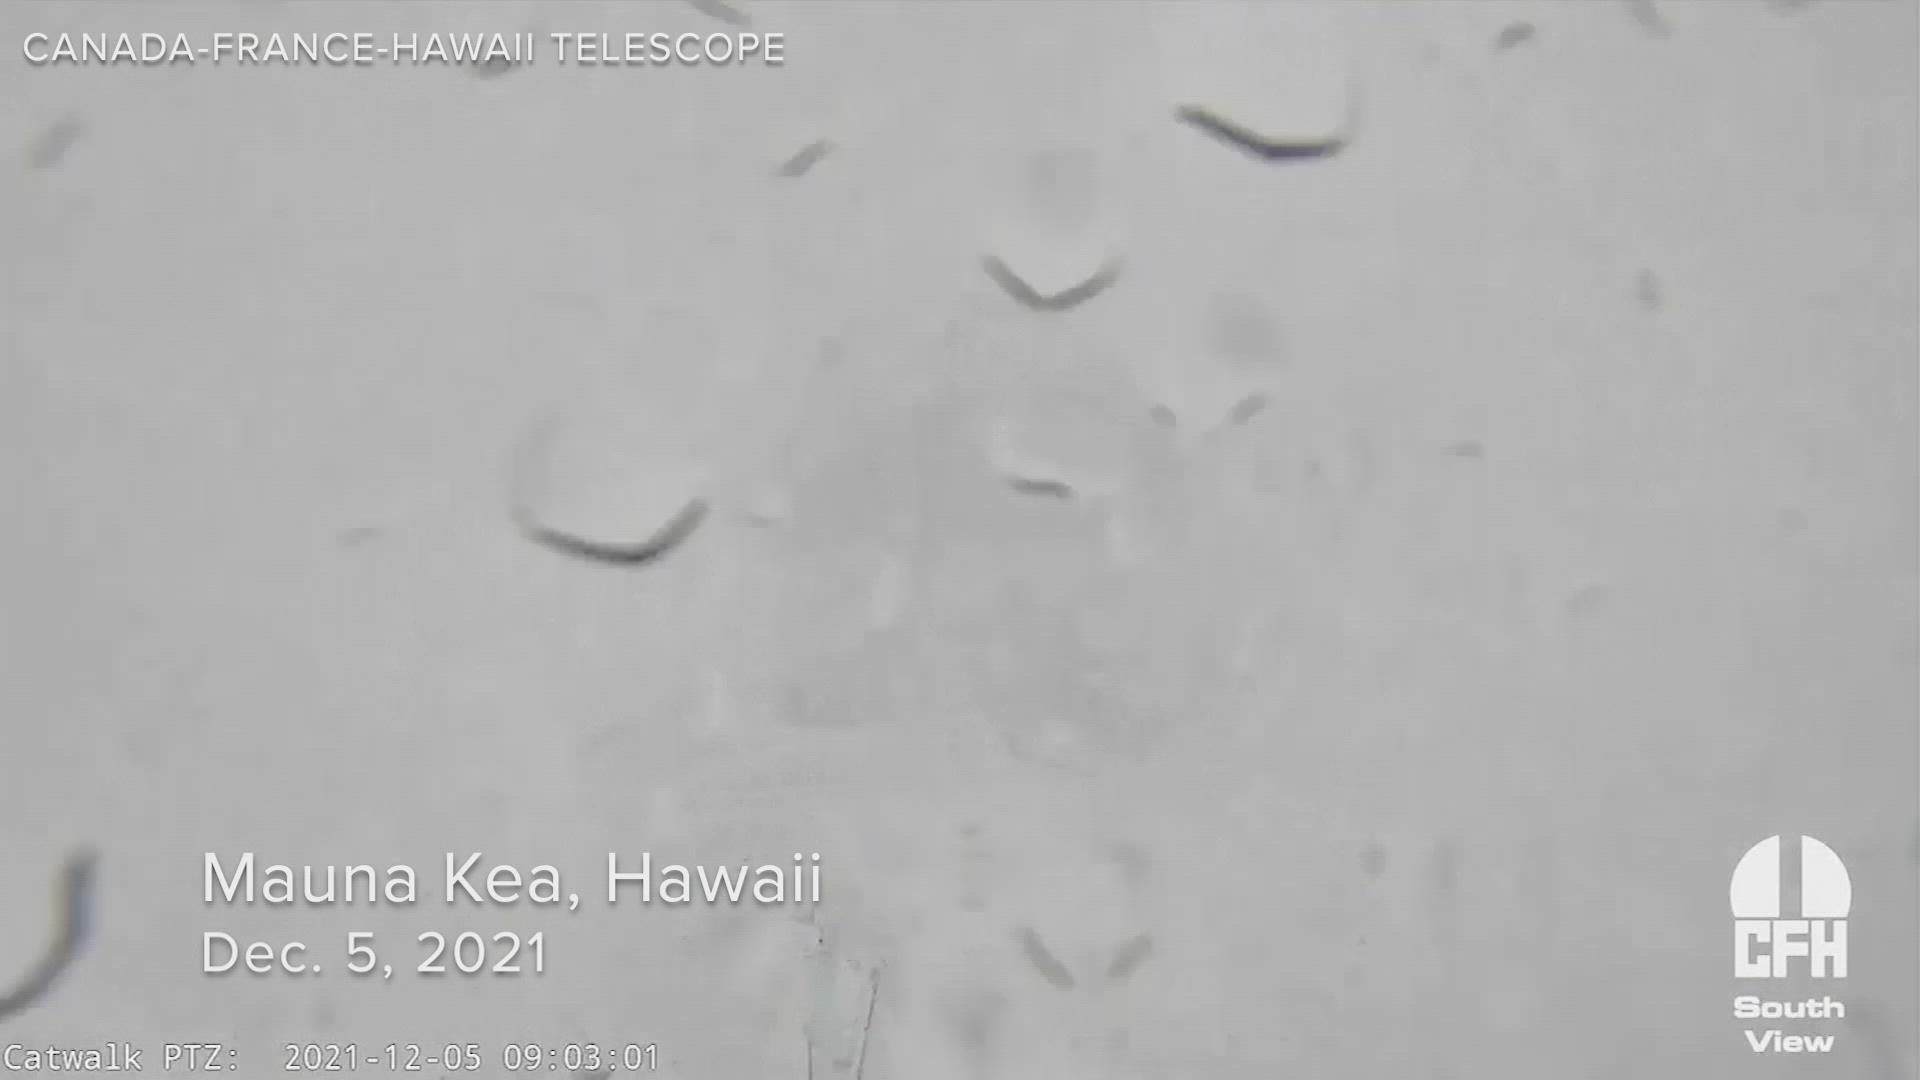 Hawaii's Mauna Kea summit received up to eight inches of snow Sunday as a strong weather system hit.